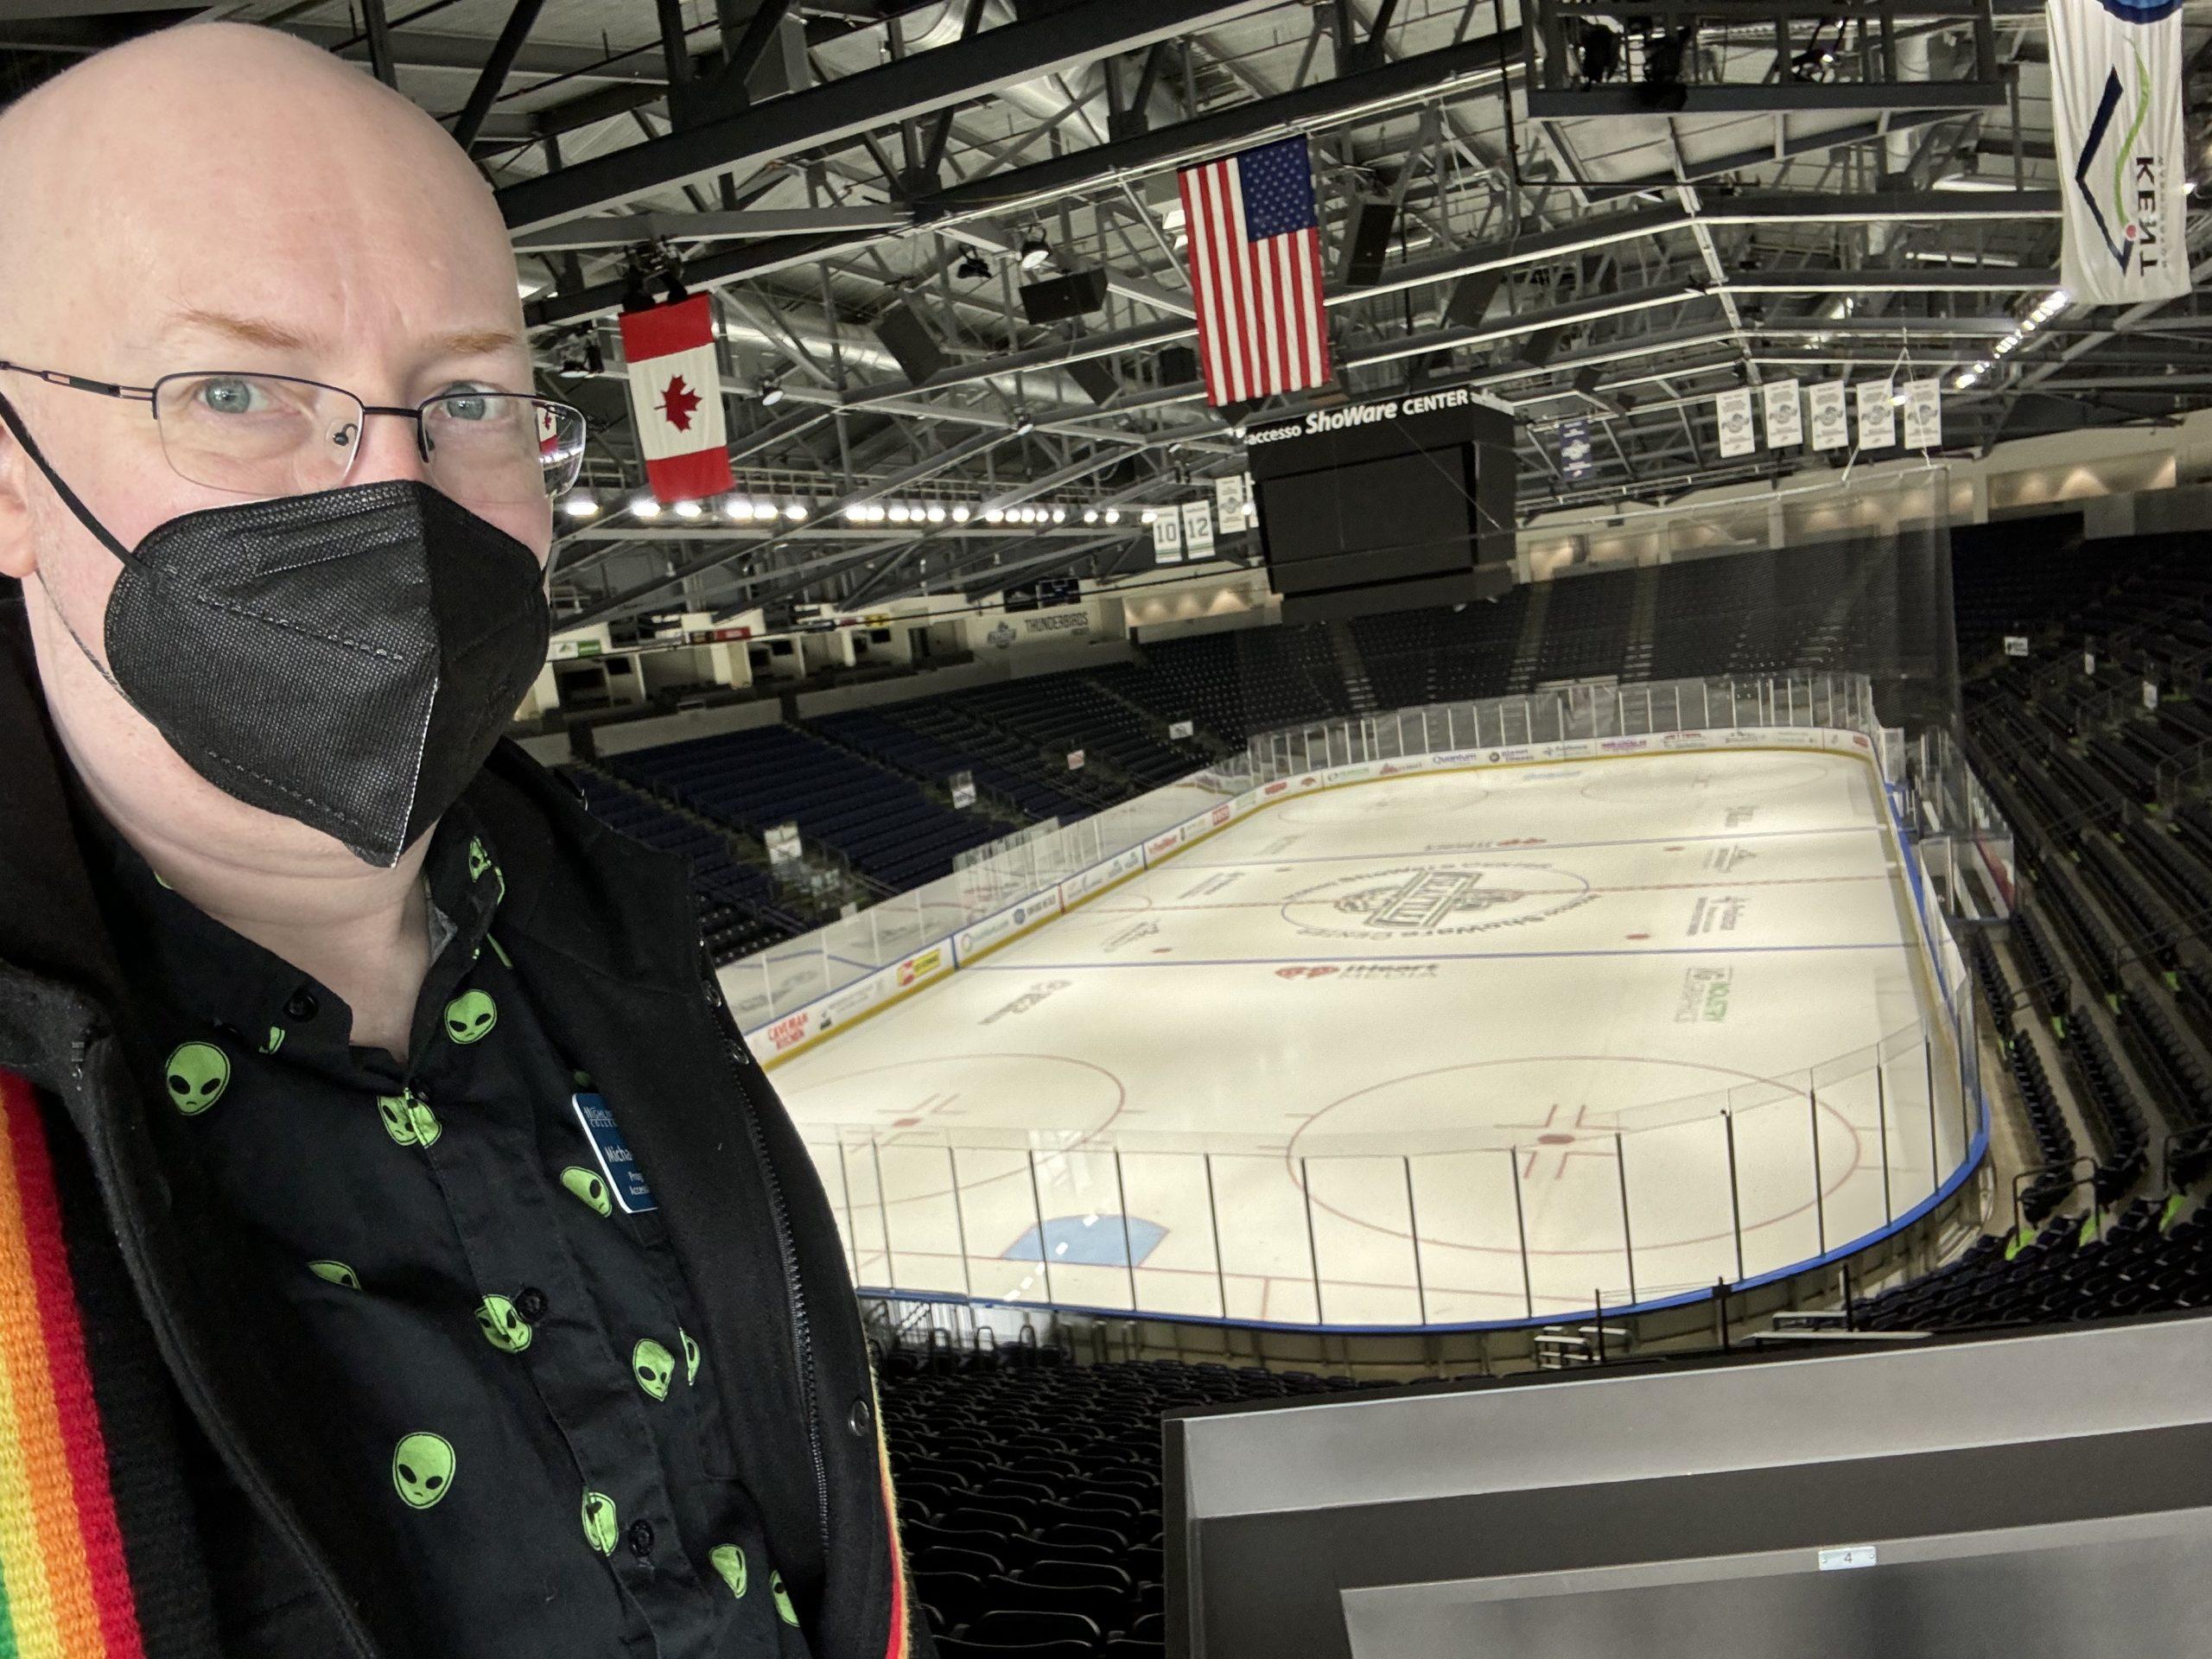 Me, wearing a black face mask, with a hocky arena visible behind me.